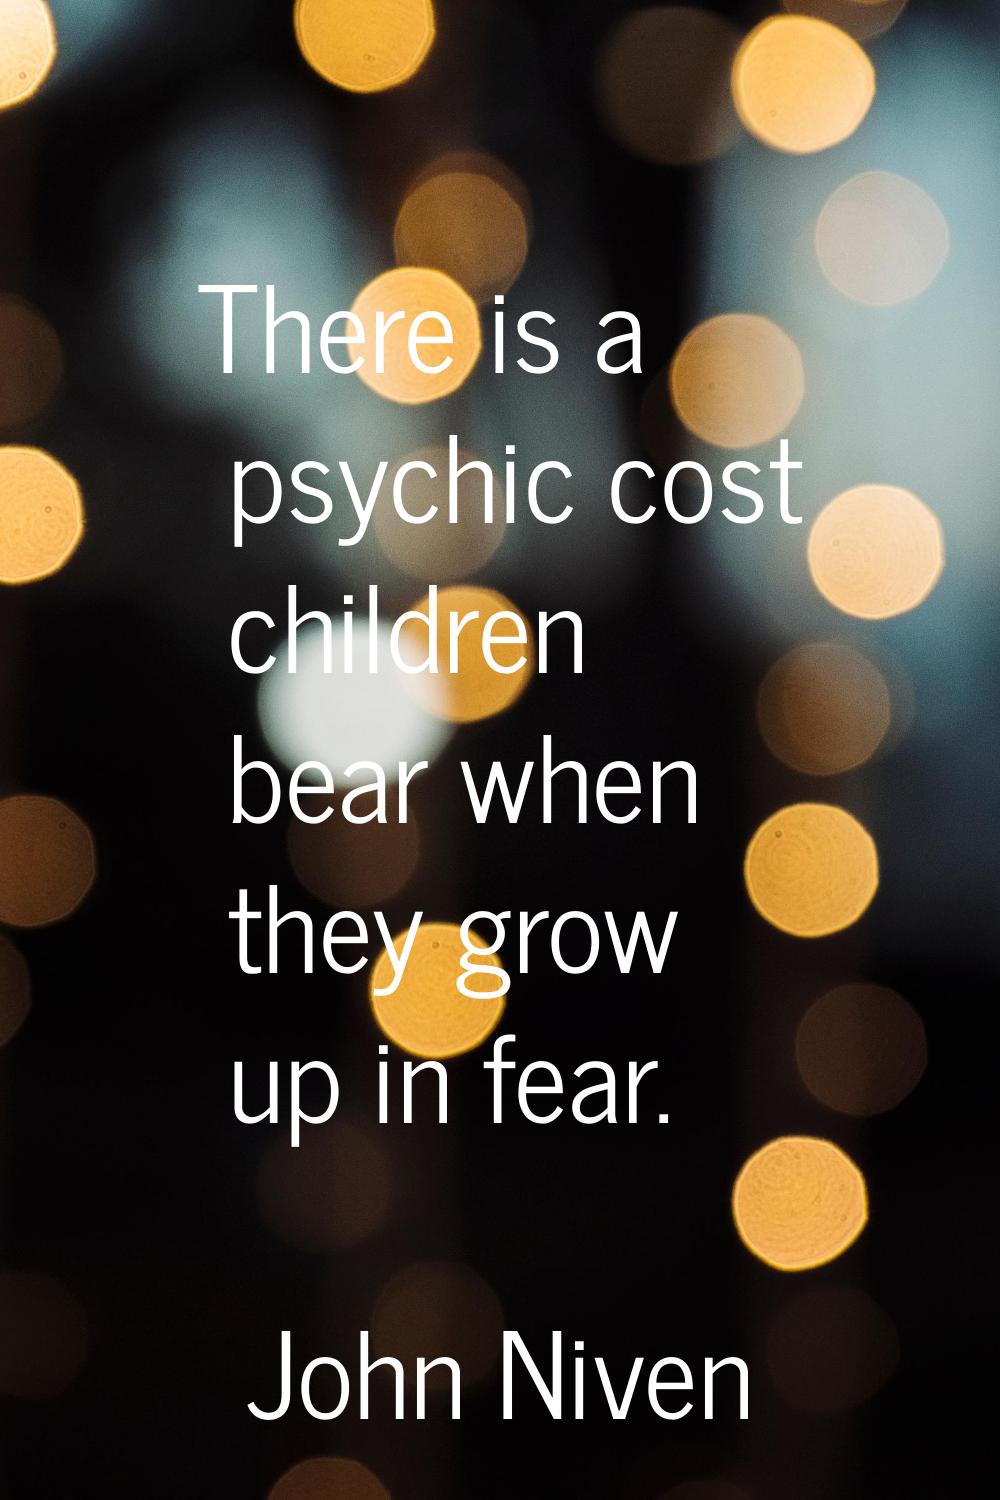 There is a psychic cost children bear when they grow up in fear.